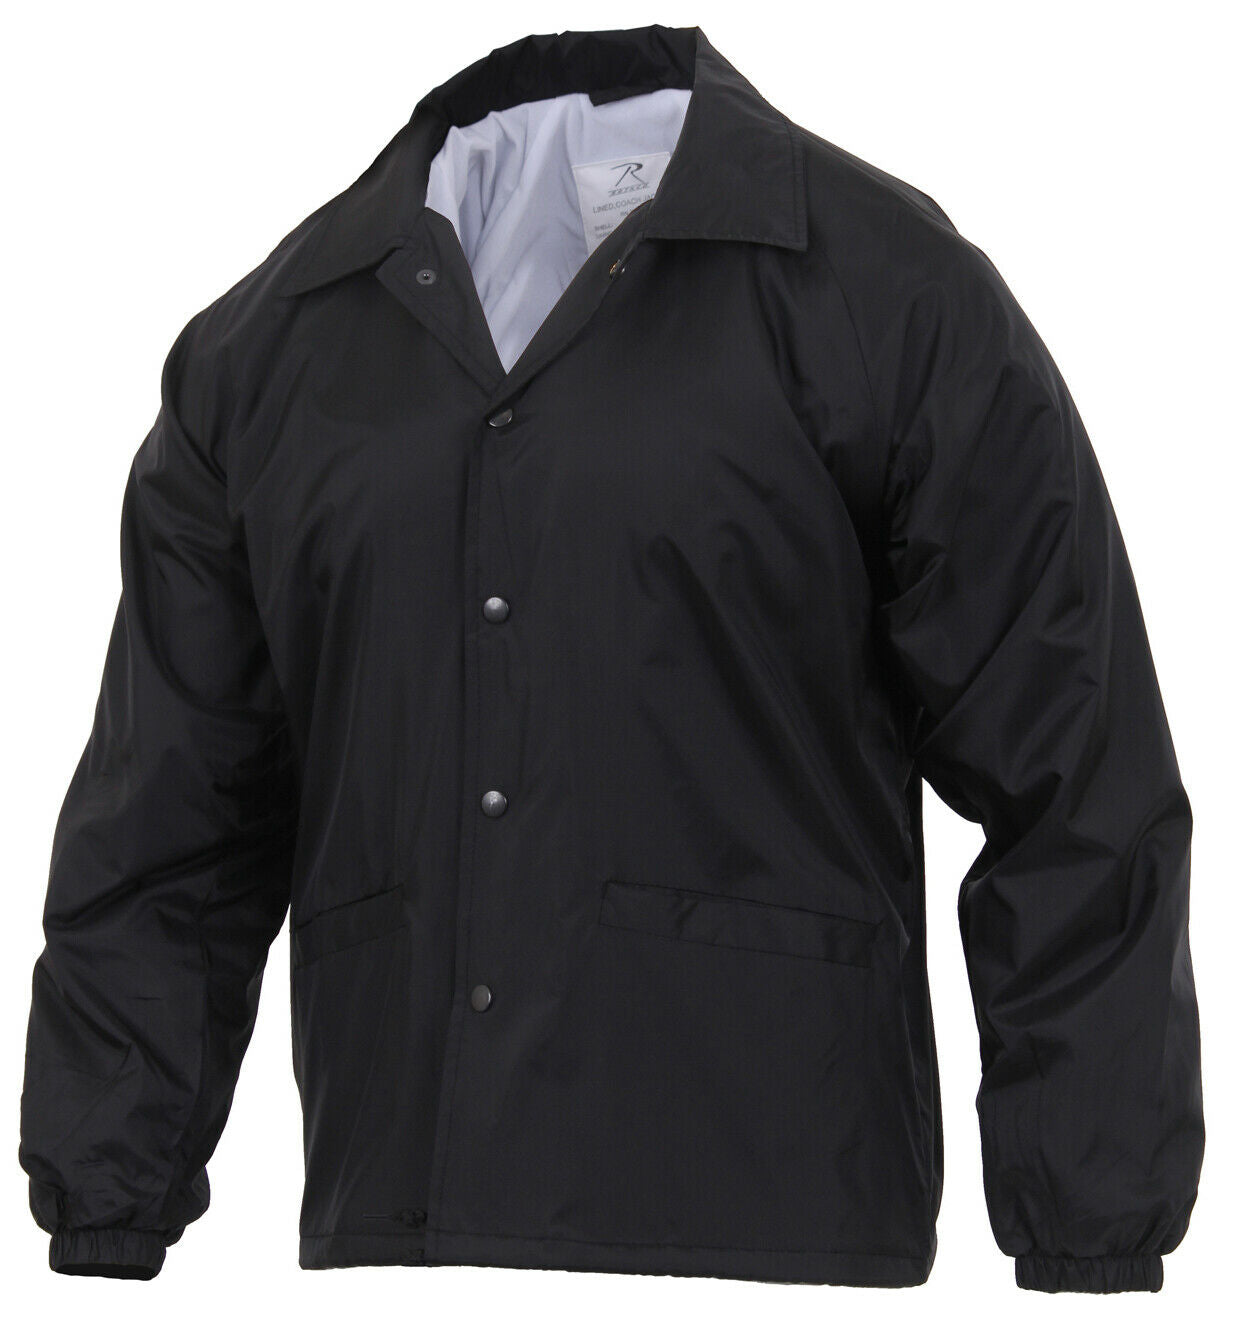 Rothco Lined Coaches Security Jacket - Black